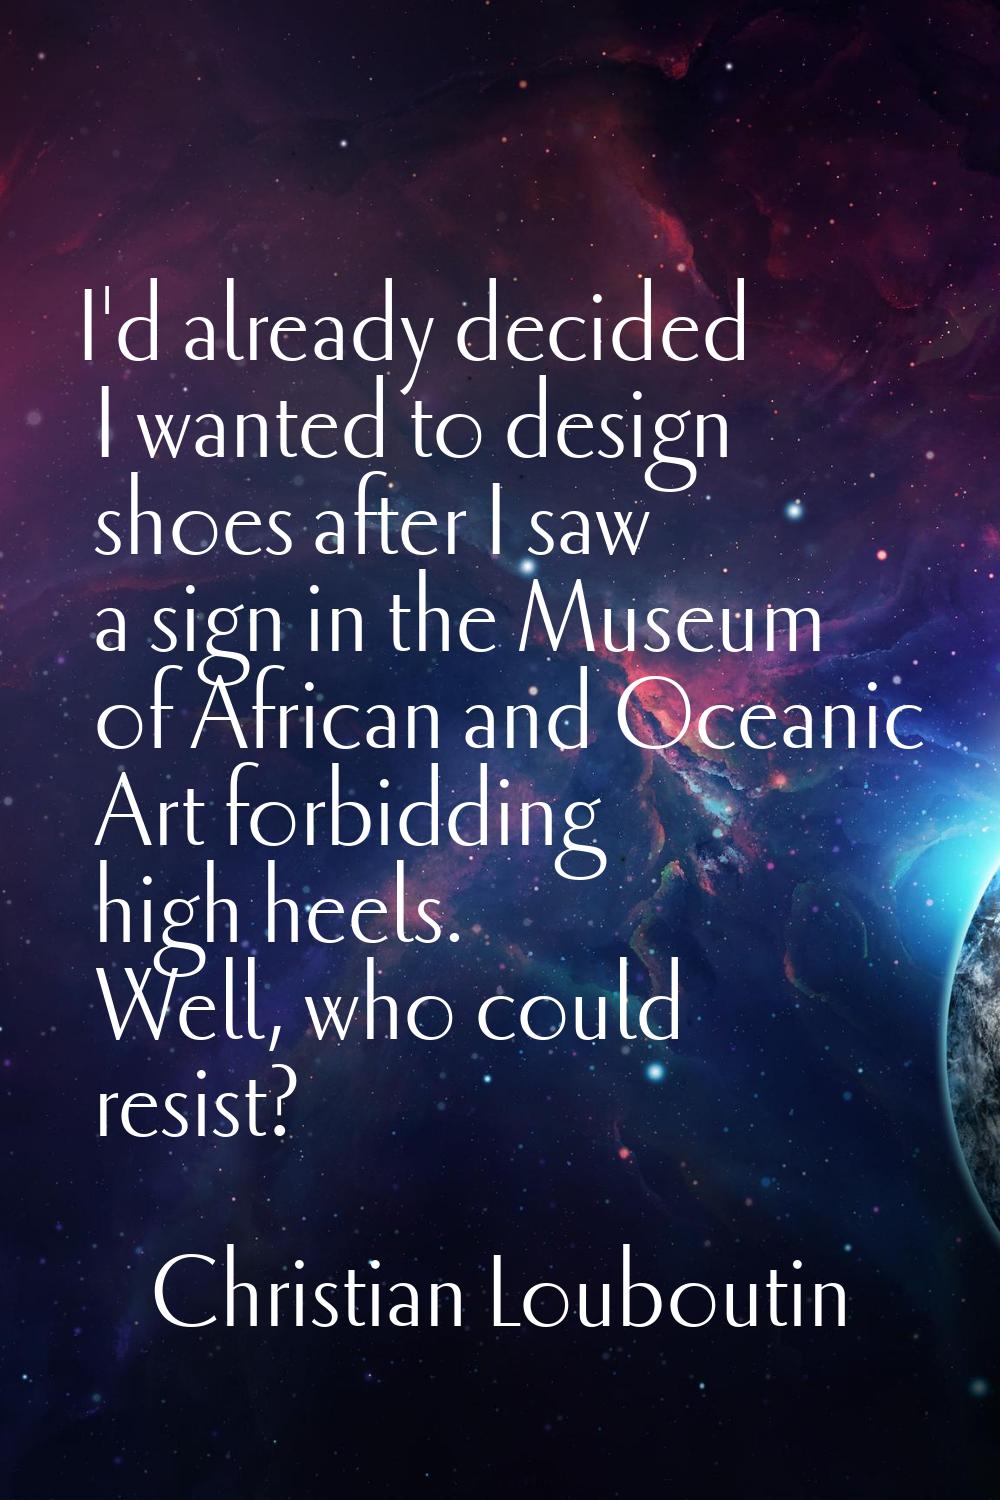 I'd already decided I wanted to design shoes after I saw a sign in the Museum of African and Oceani